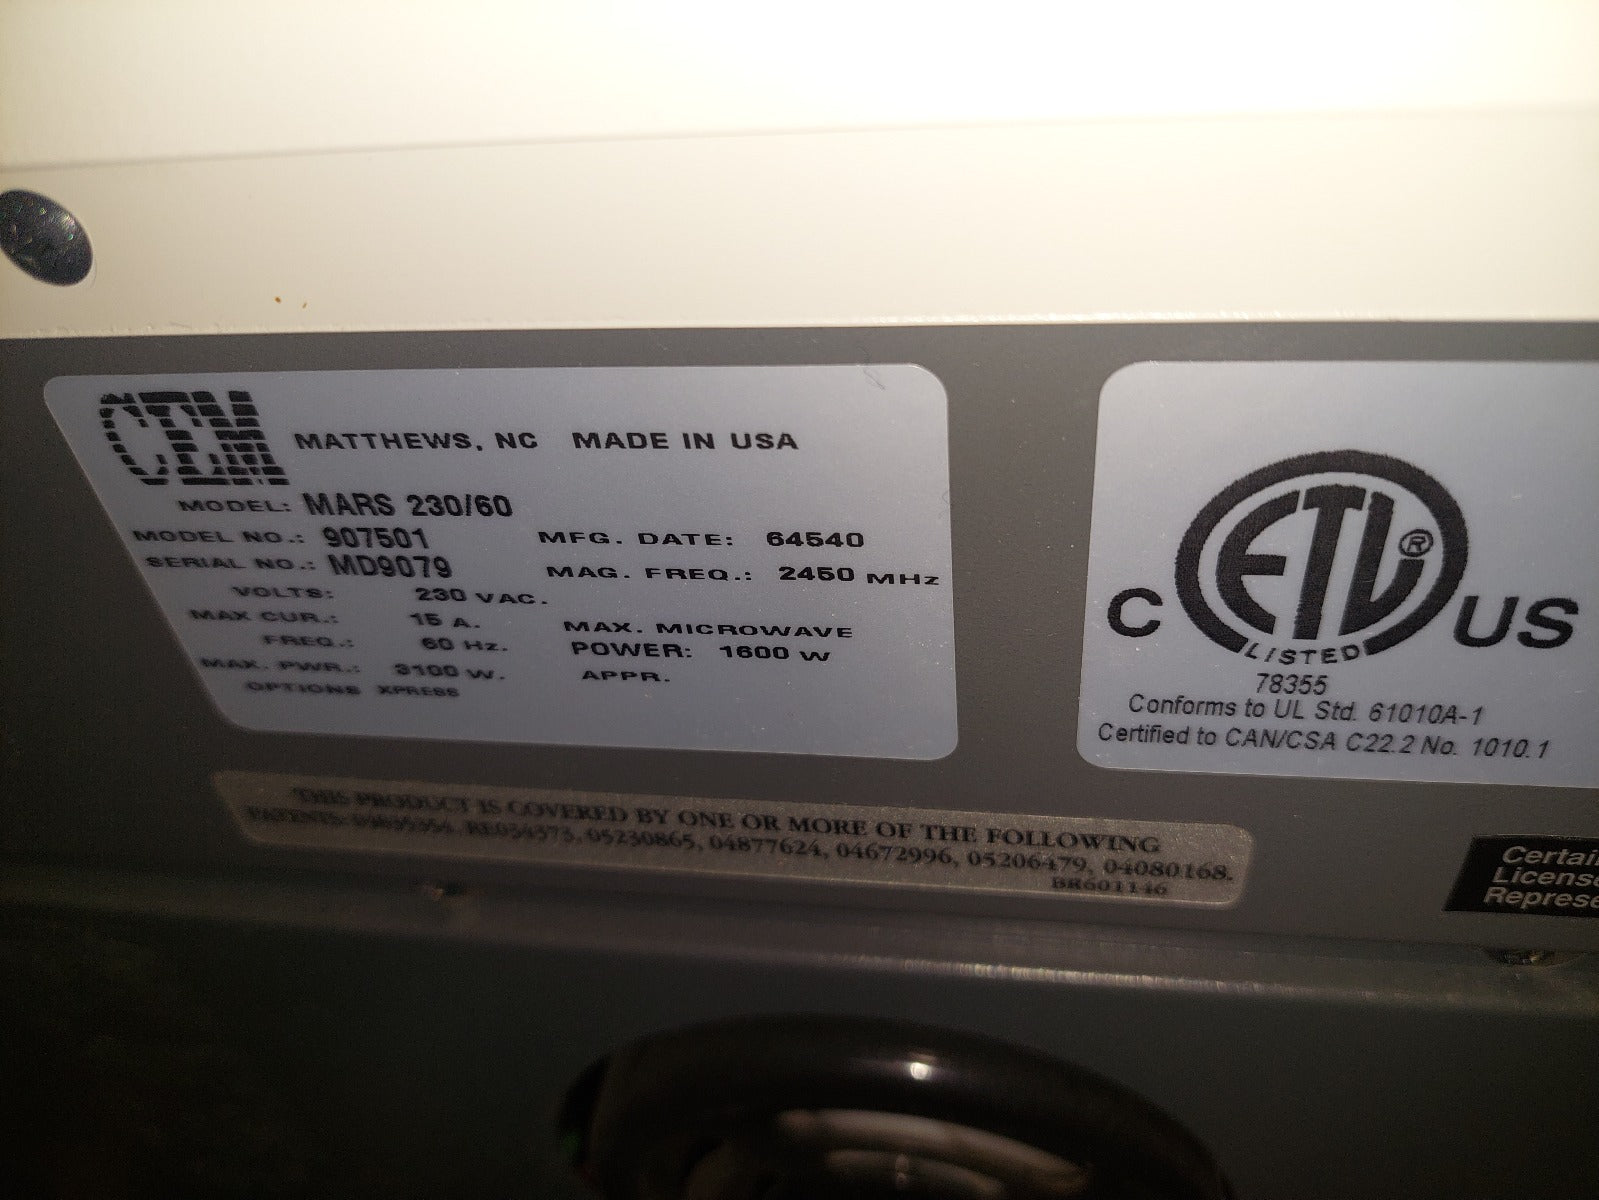 CEM MARS Xpress 230/60 907501 Microwave Digestion Oven Used